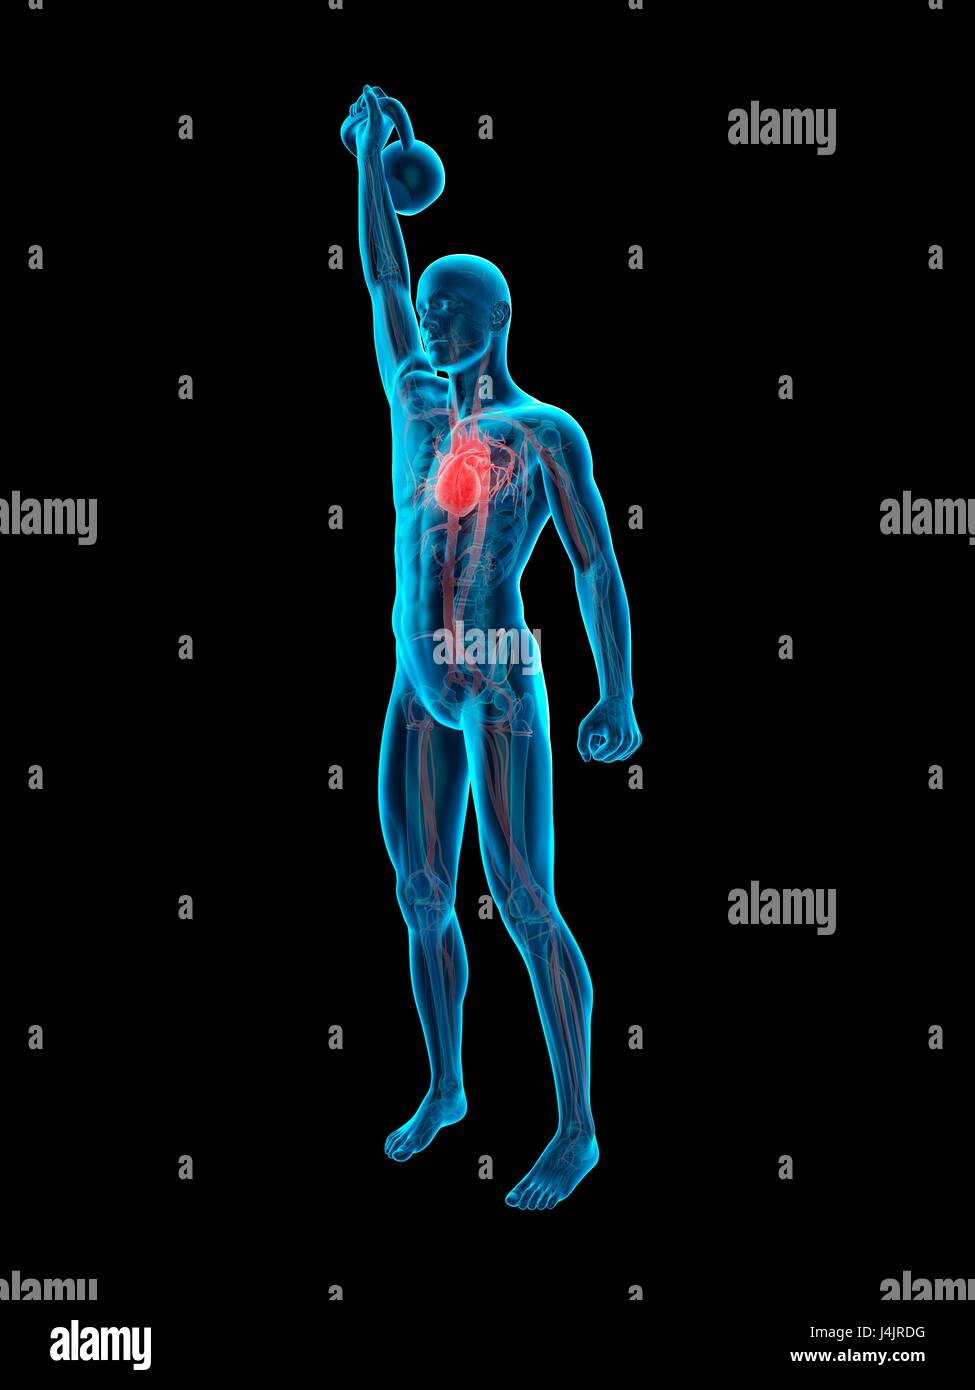 Anatomy of person lifting kettle bell, illustration Stock Photo - Alamy